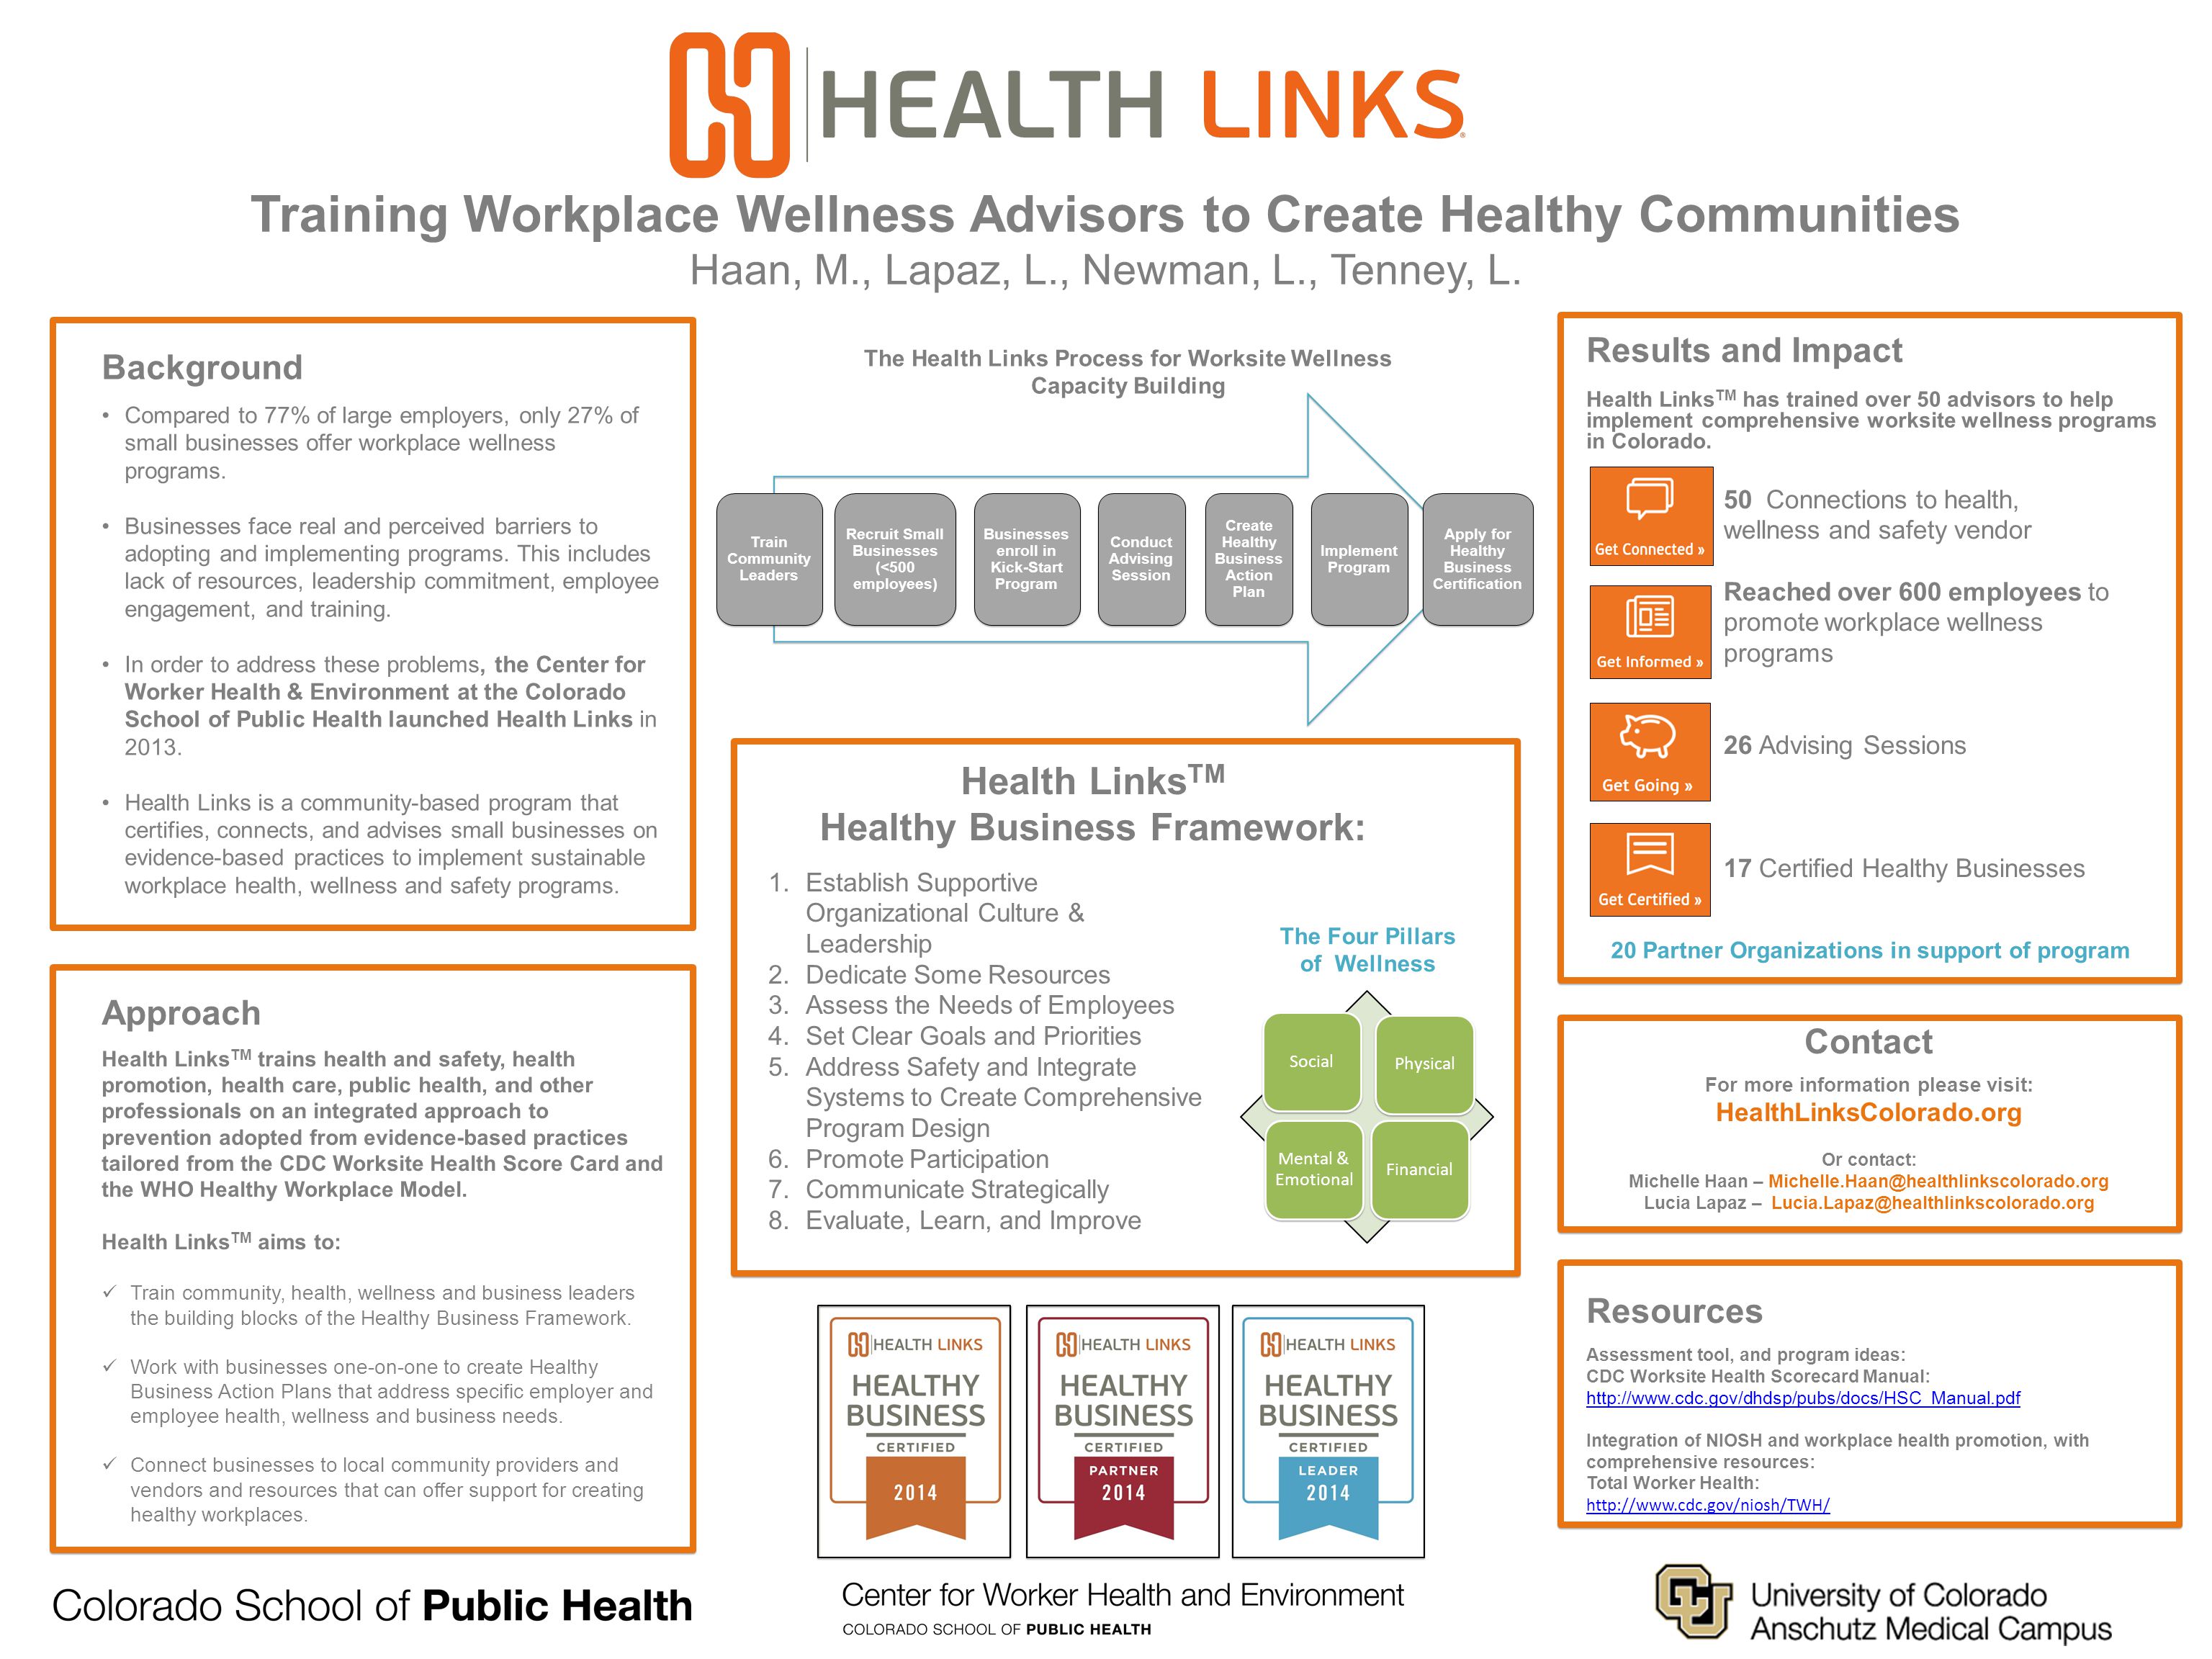 Training Workplace Wellness Advisors to Create Healthy Communities Haan, M., Lapaz, L., Newman, L., Tenney, L.